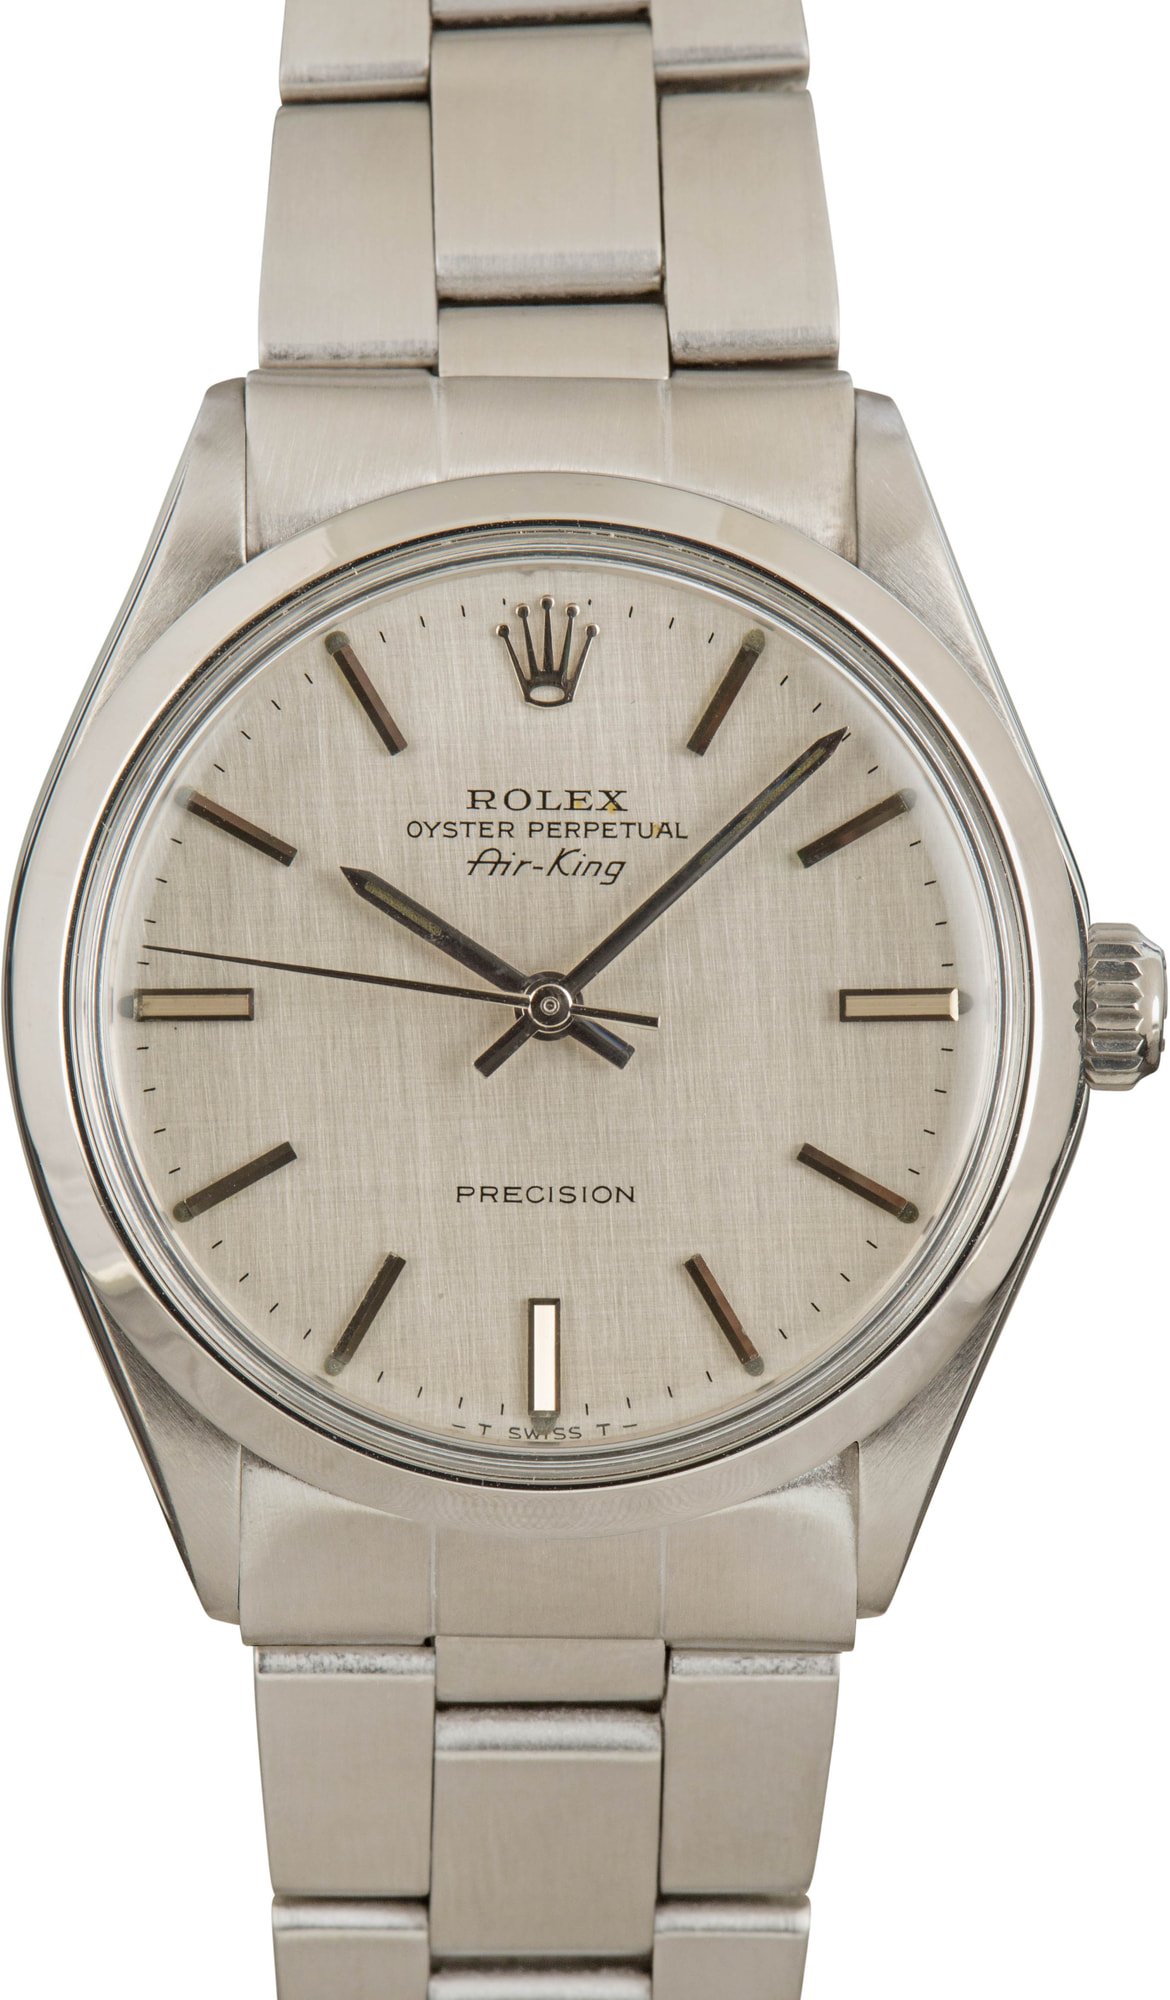 Rolex Air-King 5500 Watches - Bob's Watches